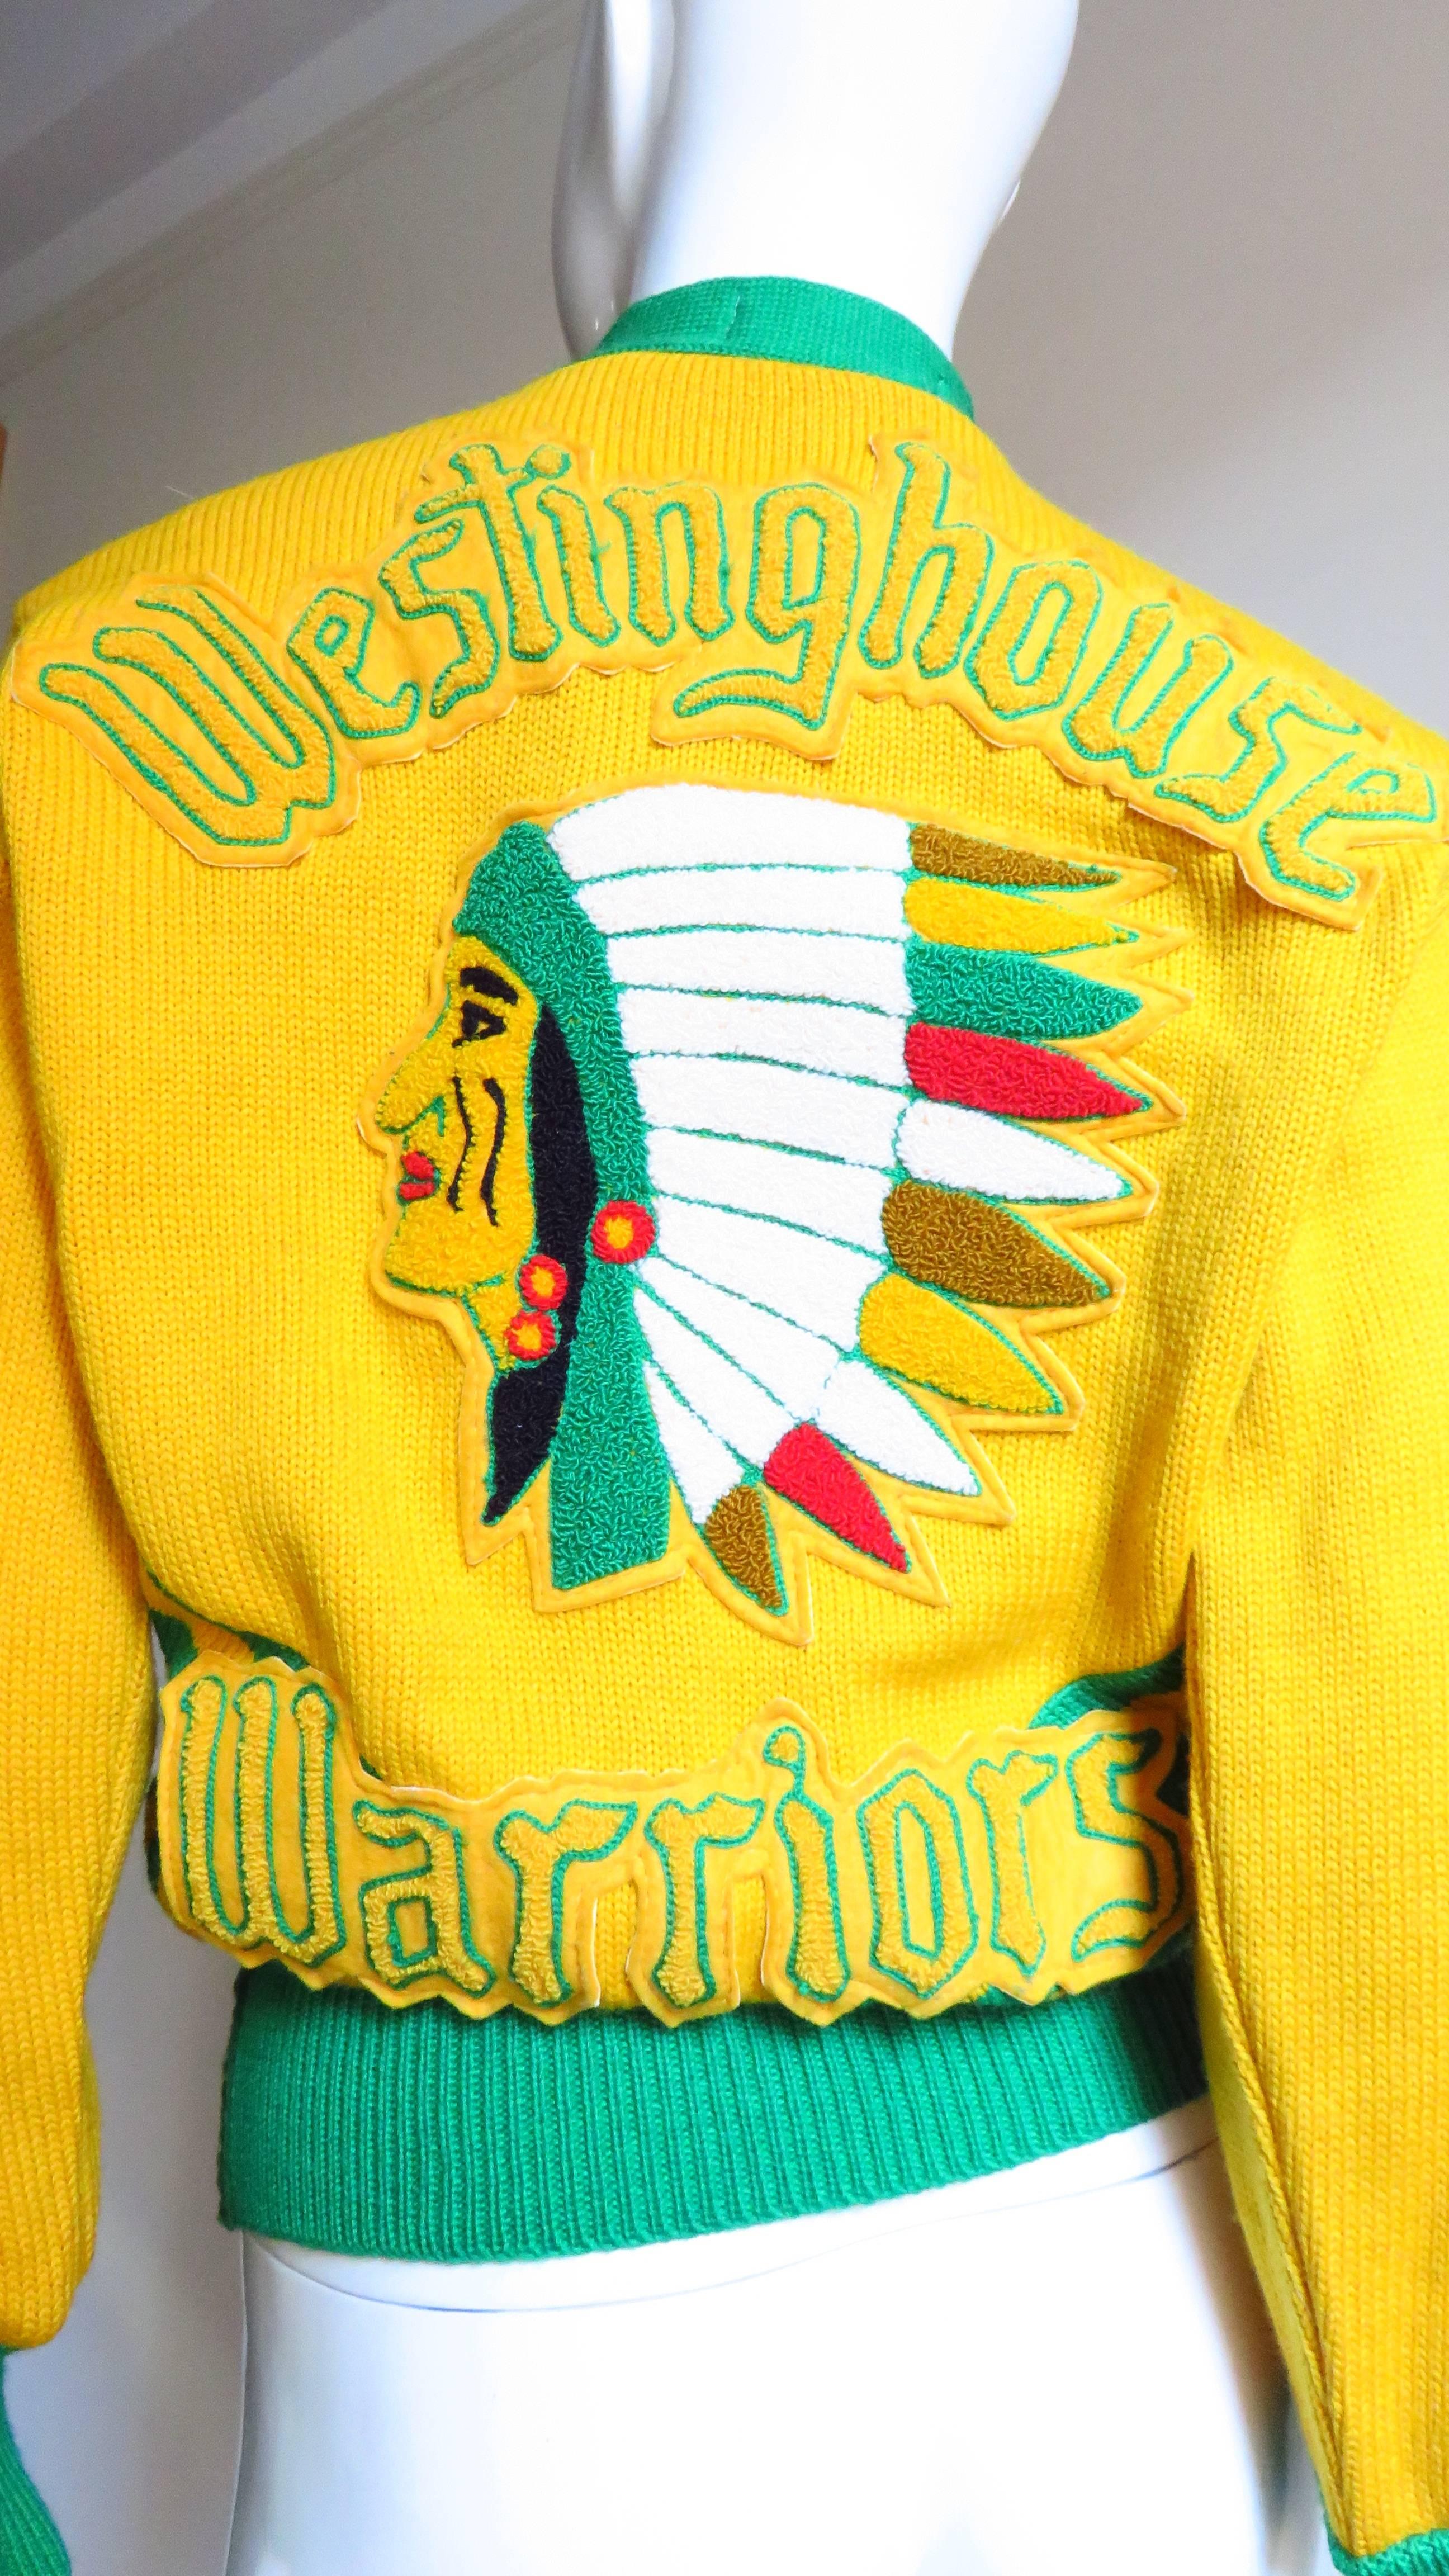 This is a unique wool team sports sweater made by Logan. It is golden yellow with green trim on the V neck, cuffs and waist.  The back is detailed with an applique of the team name 'Westinghouse Warriors' and a colorful Native American image.  The